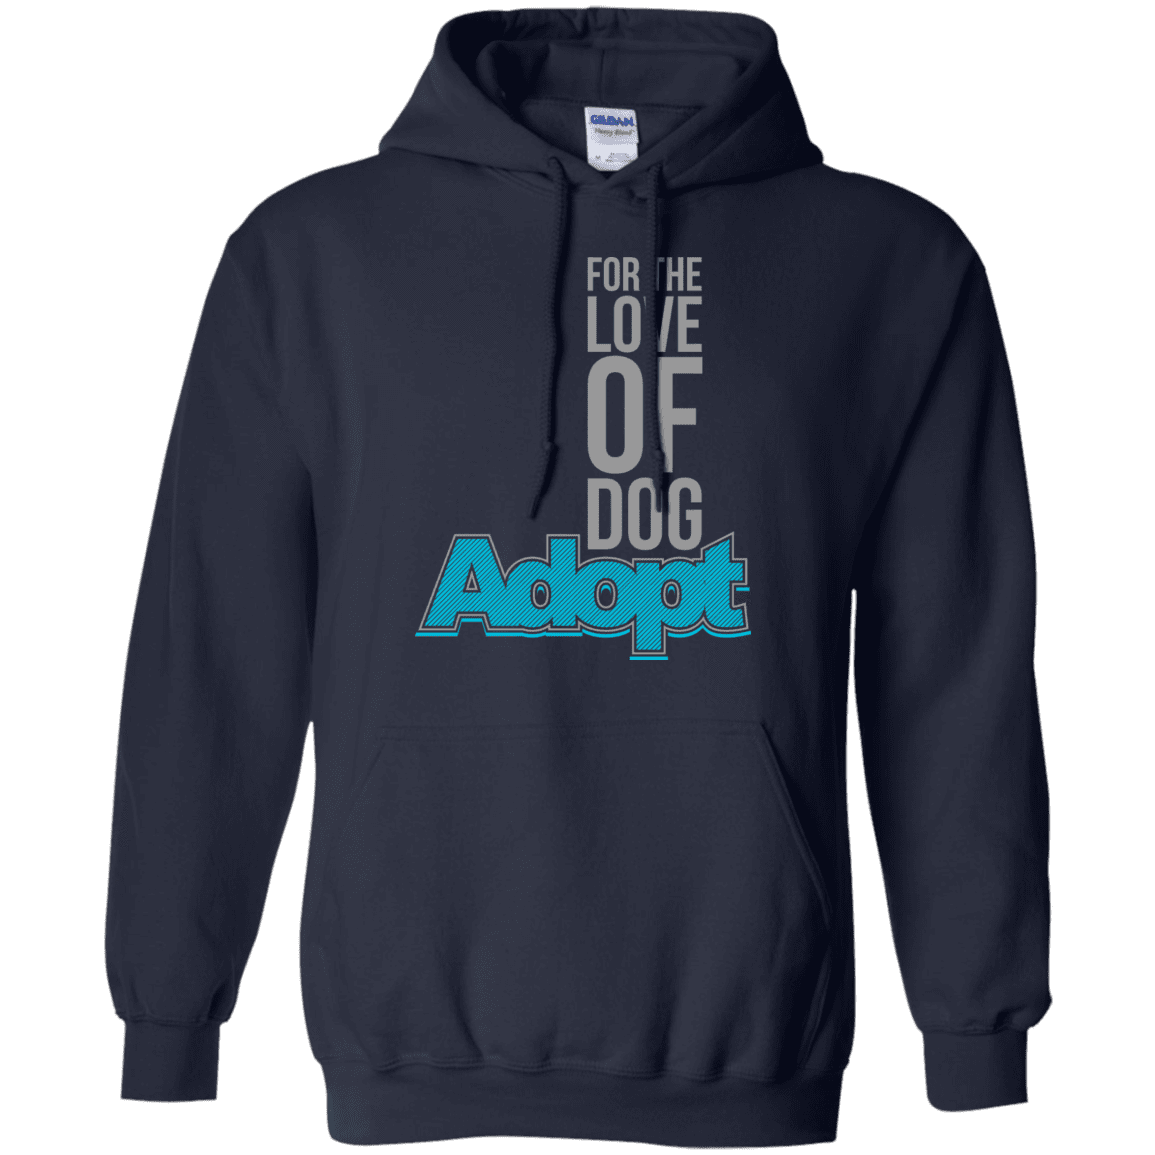 For The Love Of Dog Adopt - Hoodie.